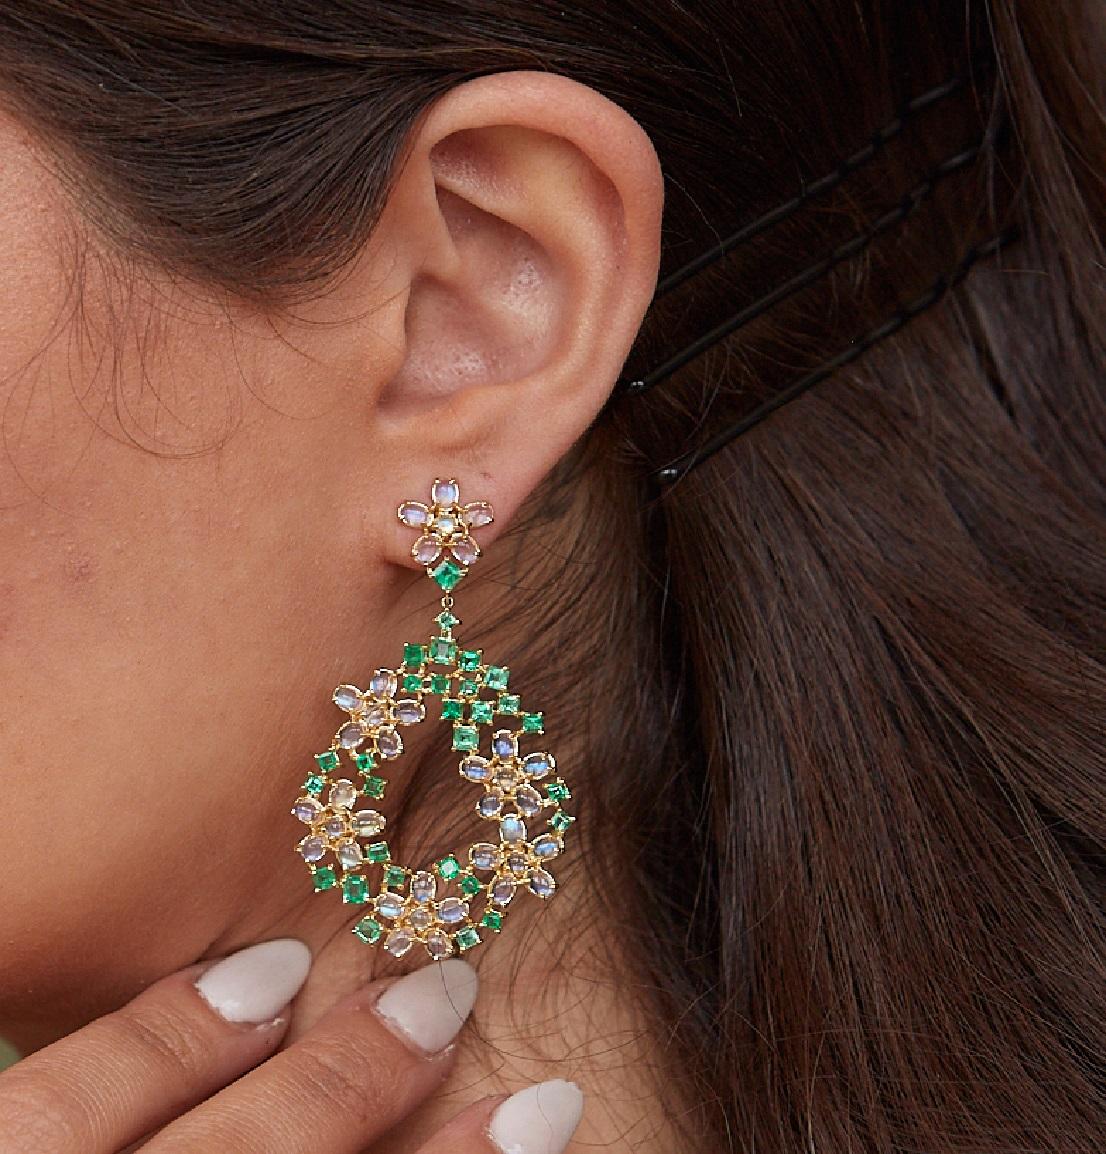 Tresor Beautiful Earring feature 13.50 carats of gemstone. The Earring is an ode to the luxurious yet classic beauty with sparkly gemstones and feminine hues. Their contemporary and modern design make them perfect and versatile to be worn at any